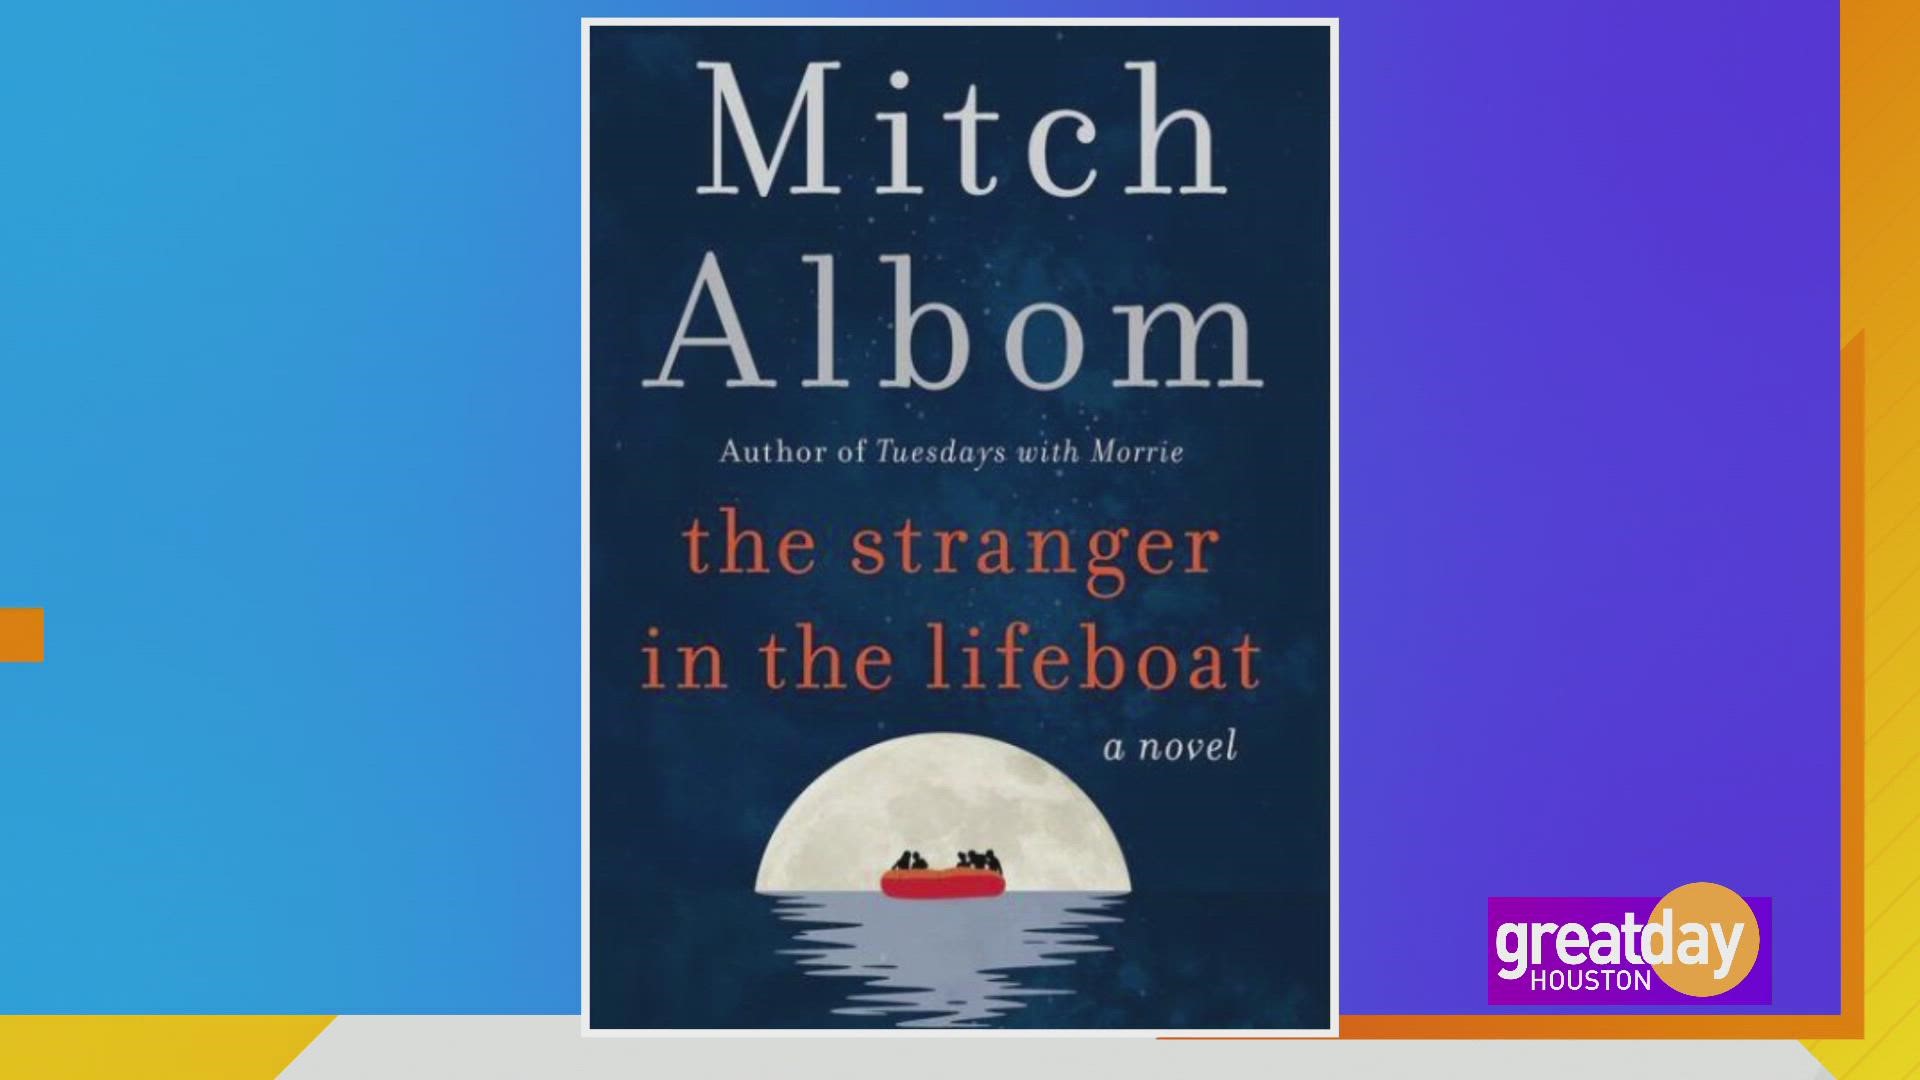 New York Times best-selling author, Mitch Albom, shares the plot of his latest novel and how writing became a form of therapy for him